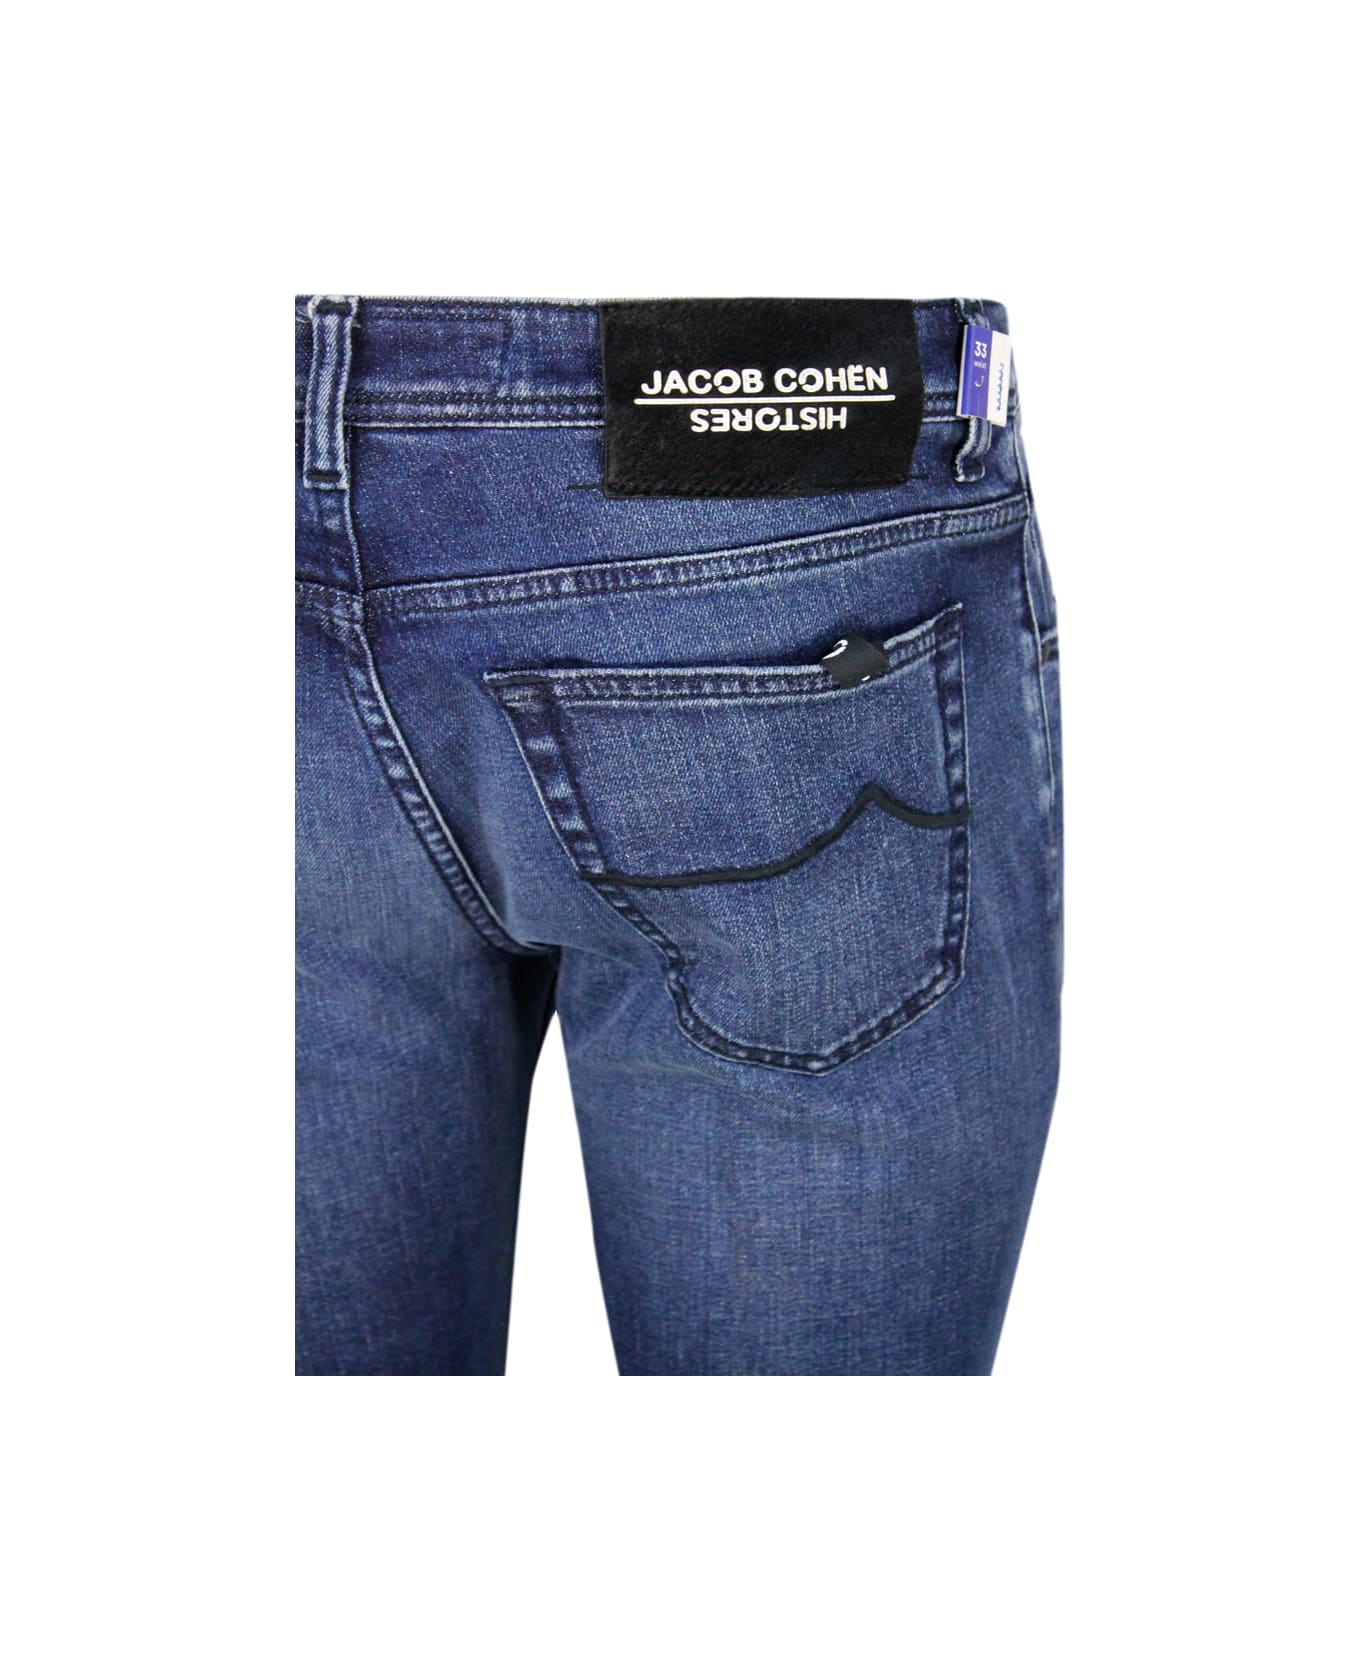 Jacob Cohen Histores Special Scott Trousers In Luxury Edition In 5-pocket Stretch Denim With Buttons Closure And Pony Skin Label With Logo Lettering - Denim